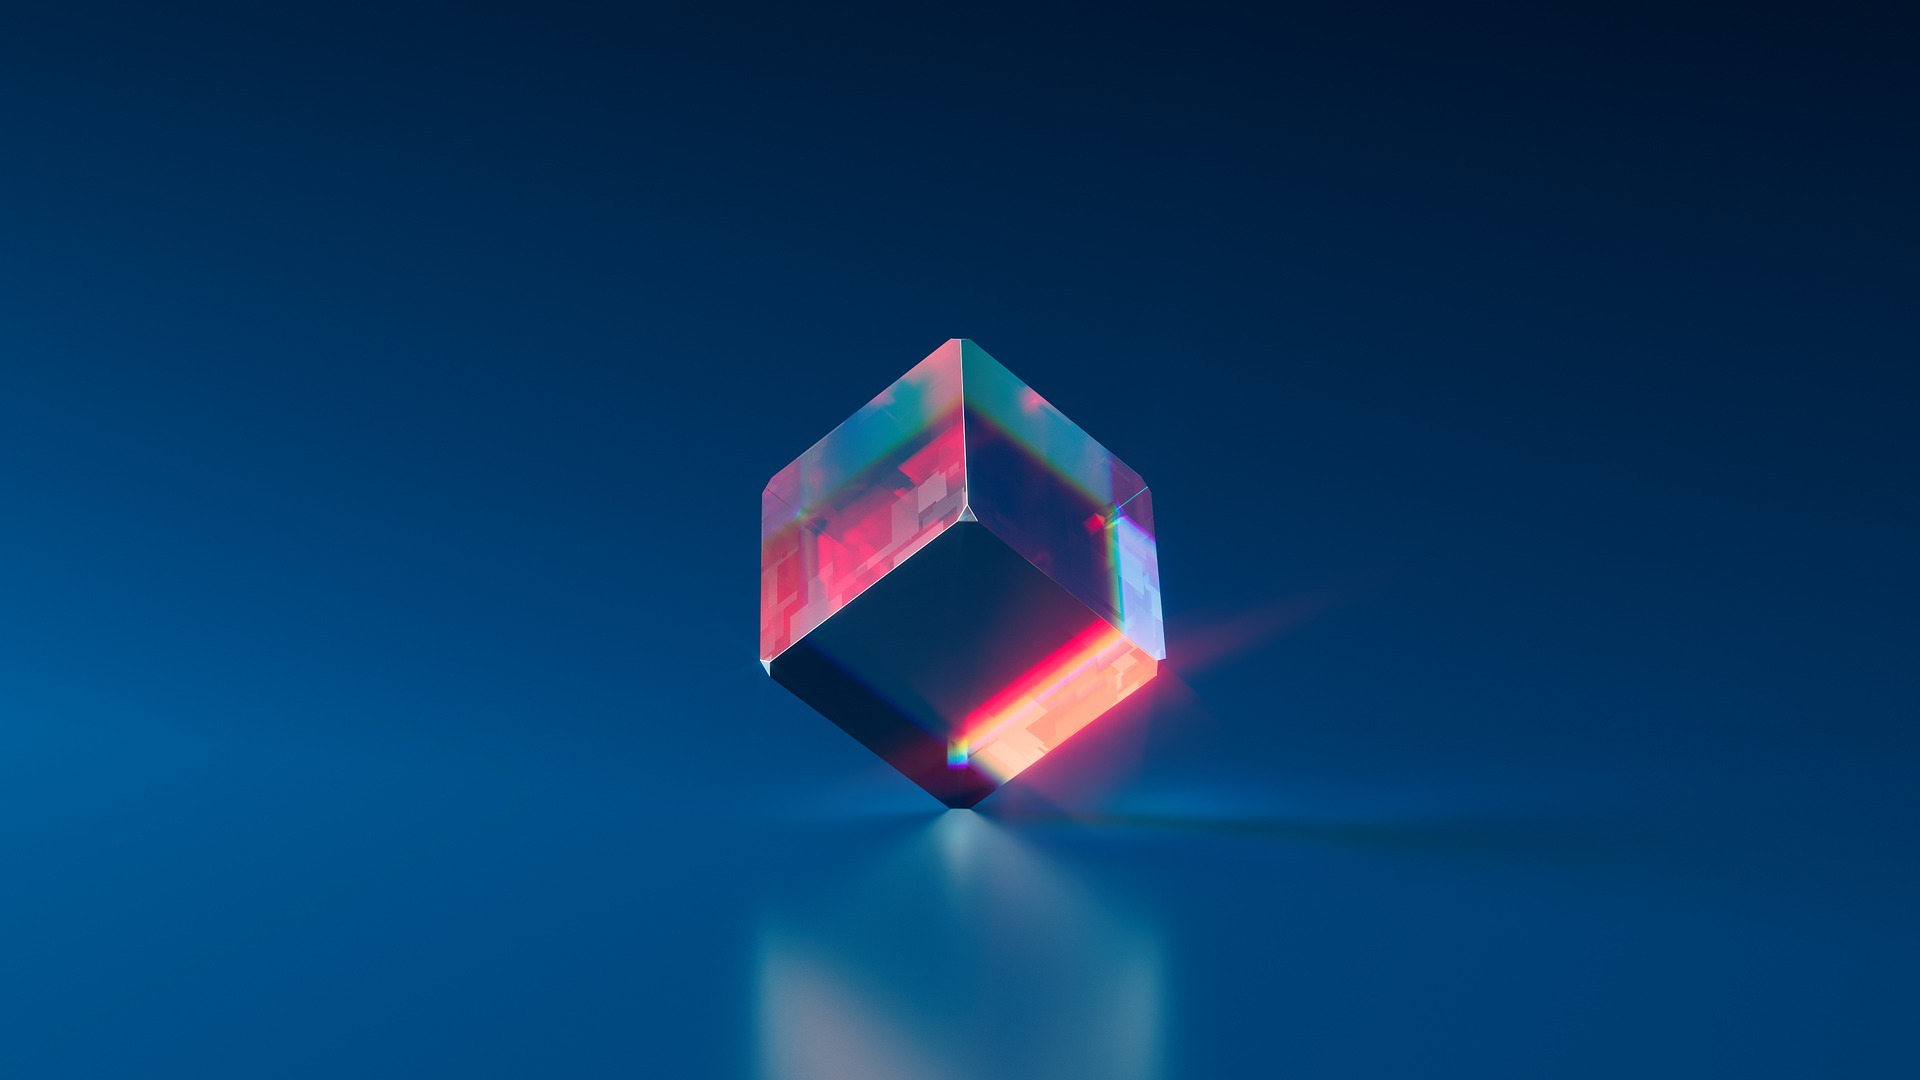 Example image of a cube